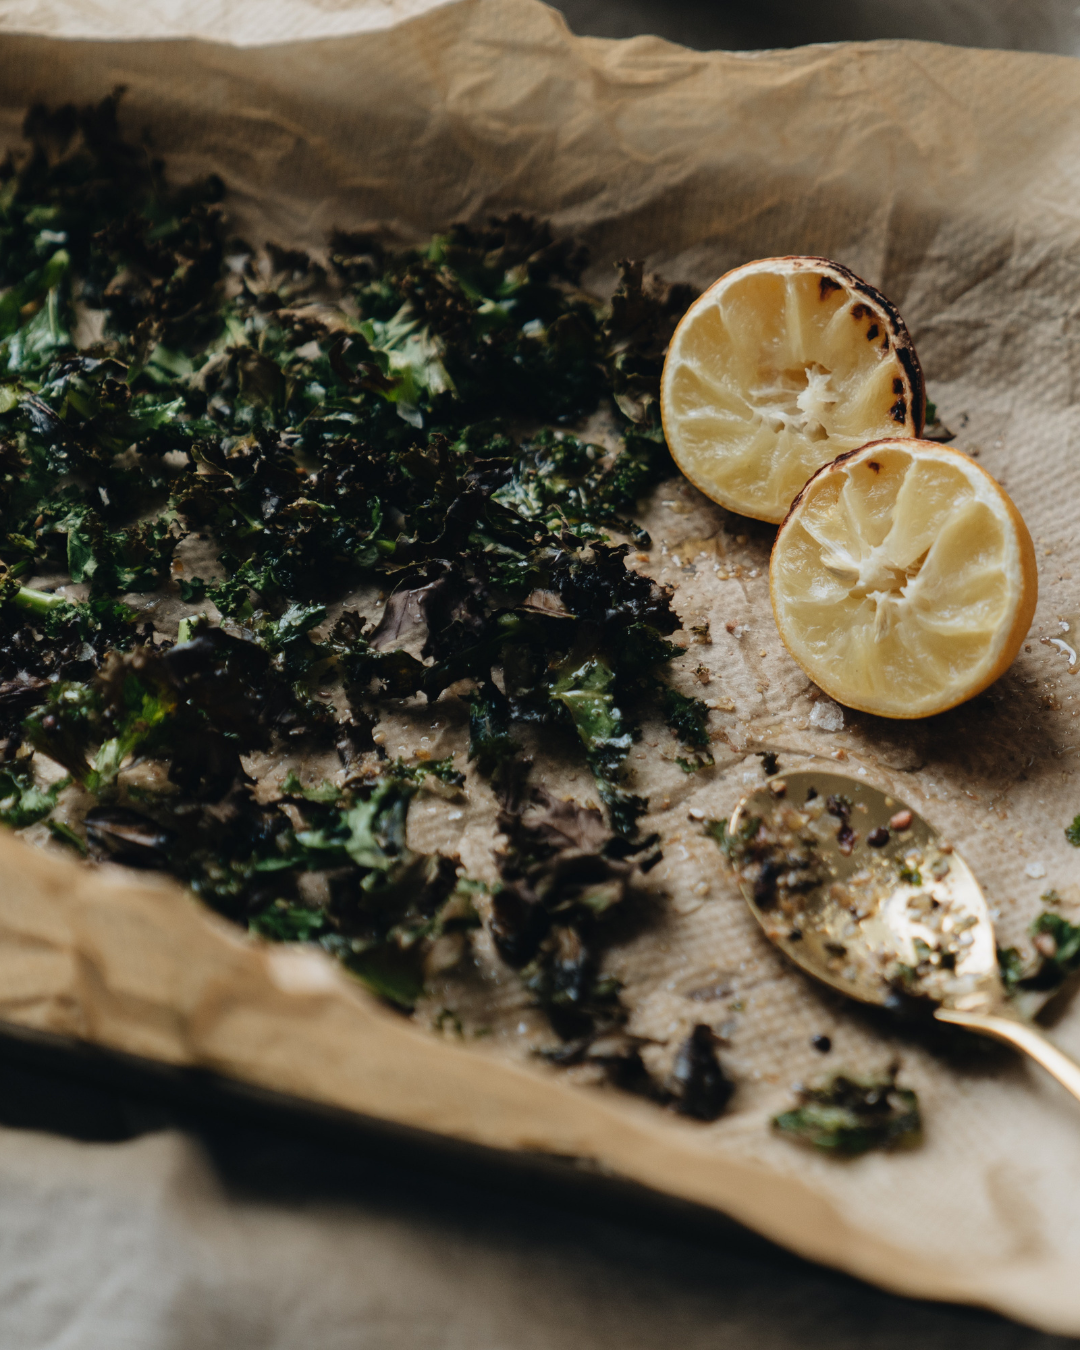 Crispy Kale Chips Recipe - Make Your Own at Home! kale+chips+recipe+ +close+up